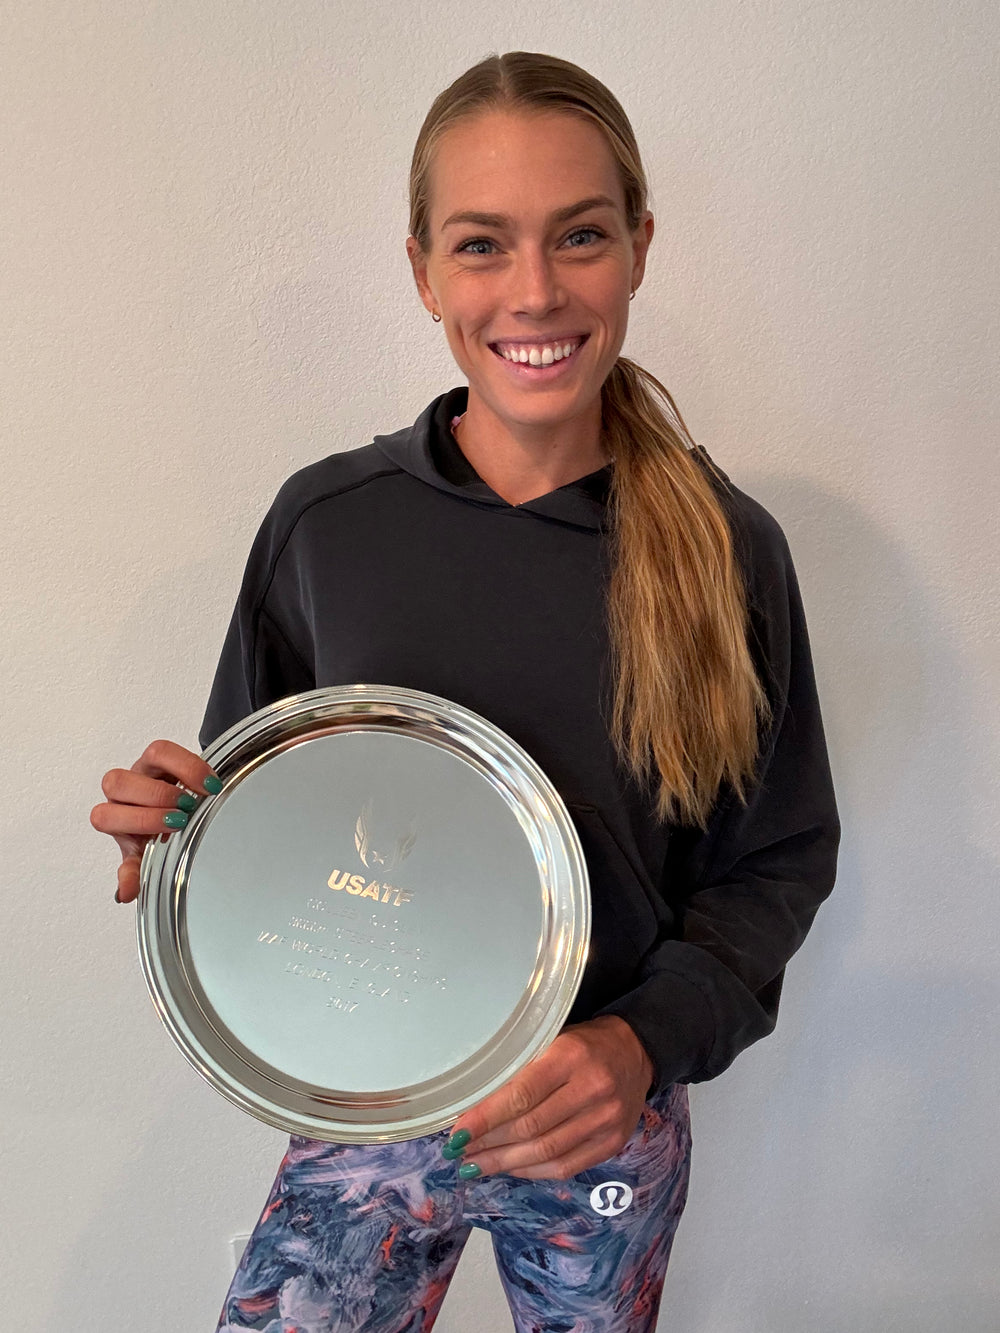 Colleen Quigley: Silver Platter from the 2017 IAAF World Championships in London, England